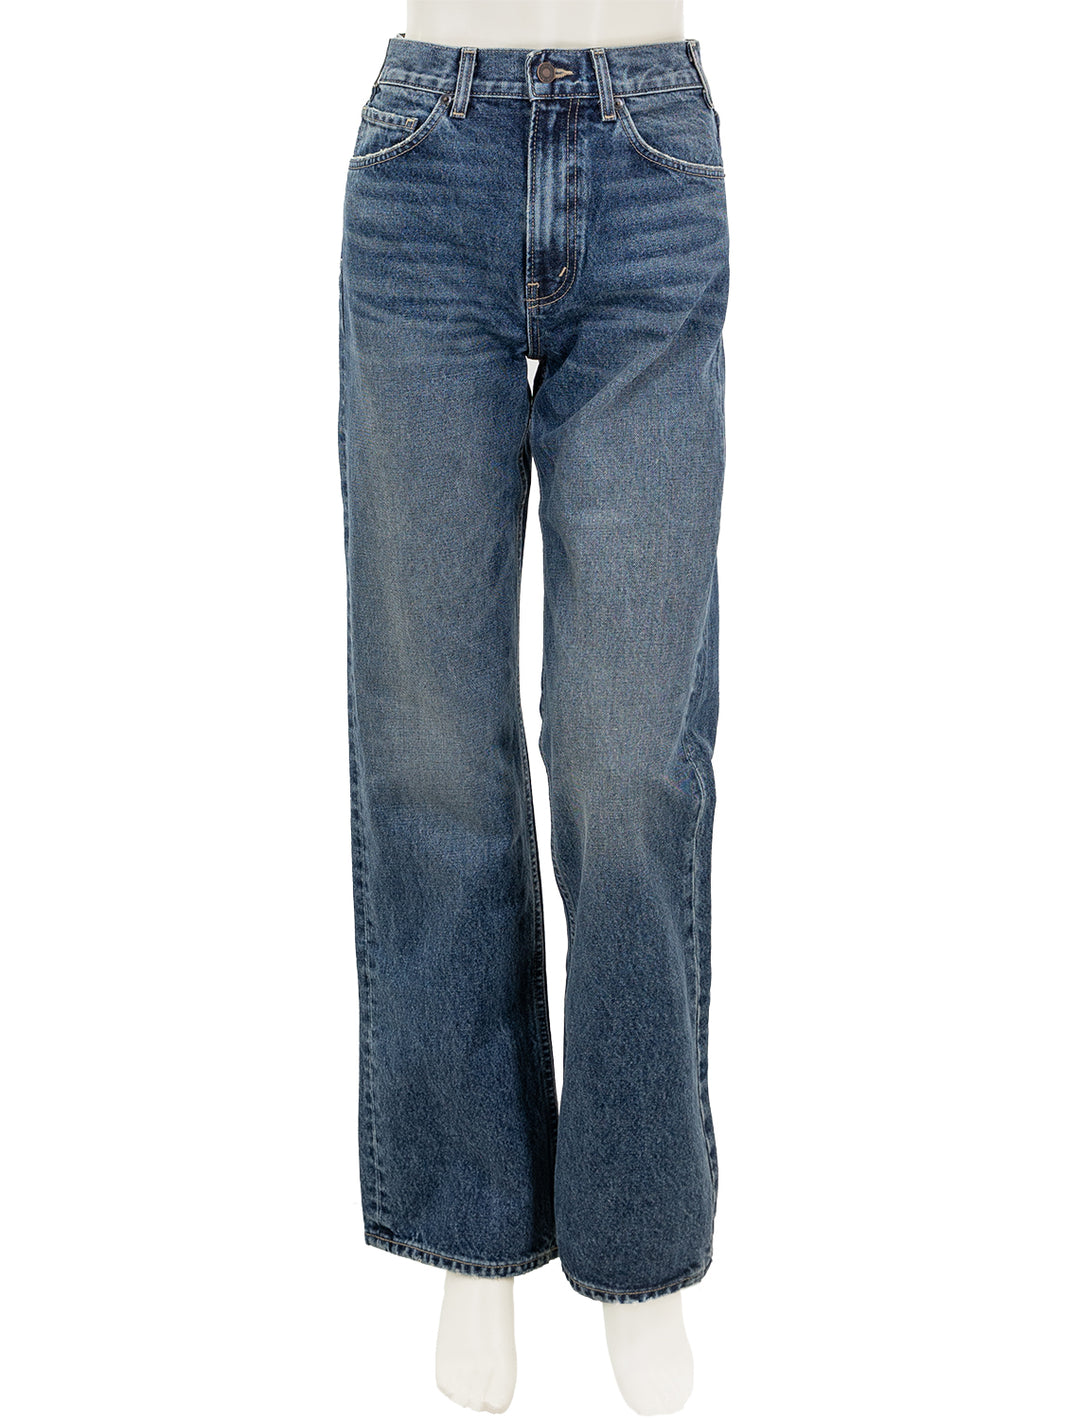 Front view of Nili Lotan's mitchell jean in ocean wash.